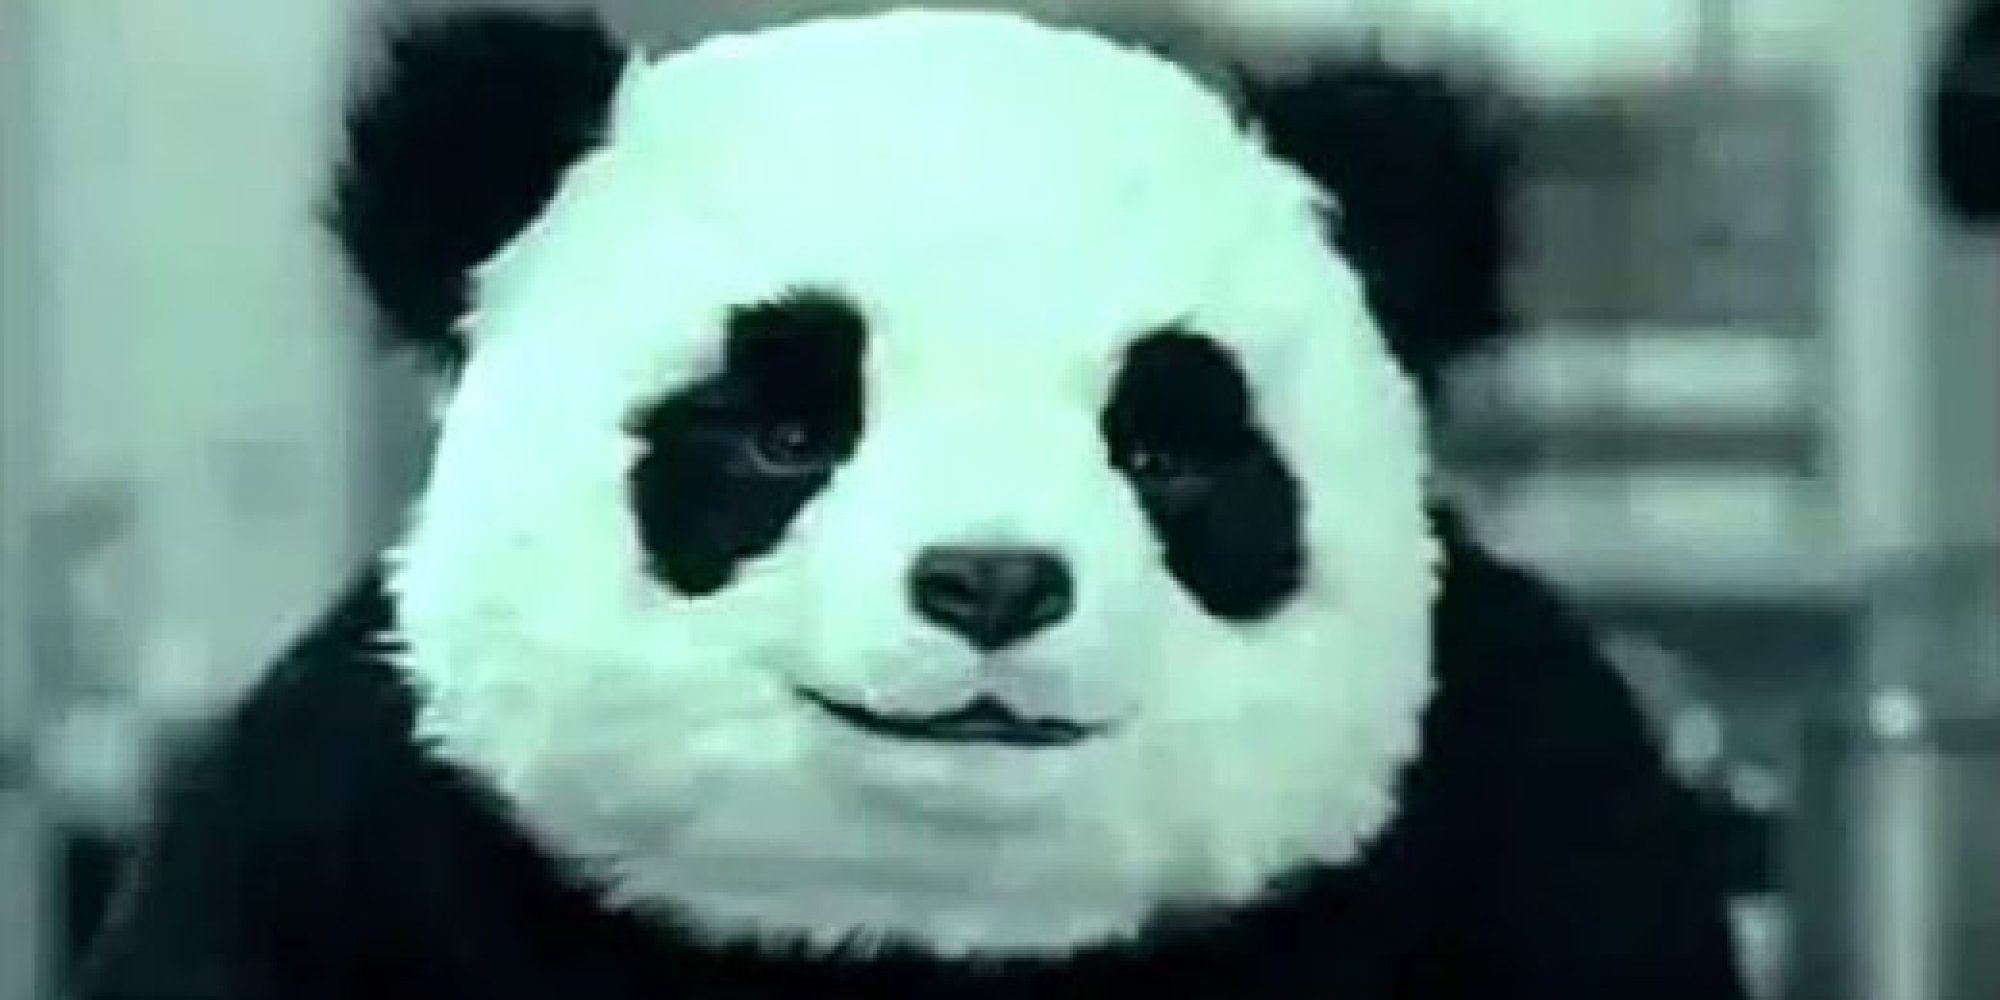 Panda Cheese Commercials Are Still Hilarious (VIDEO) | HuffPost